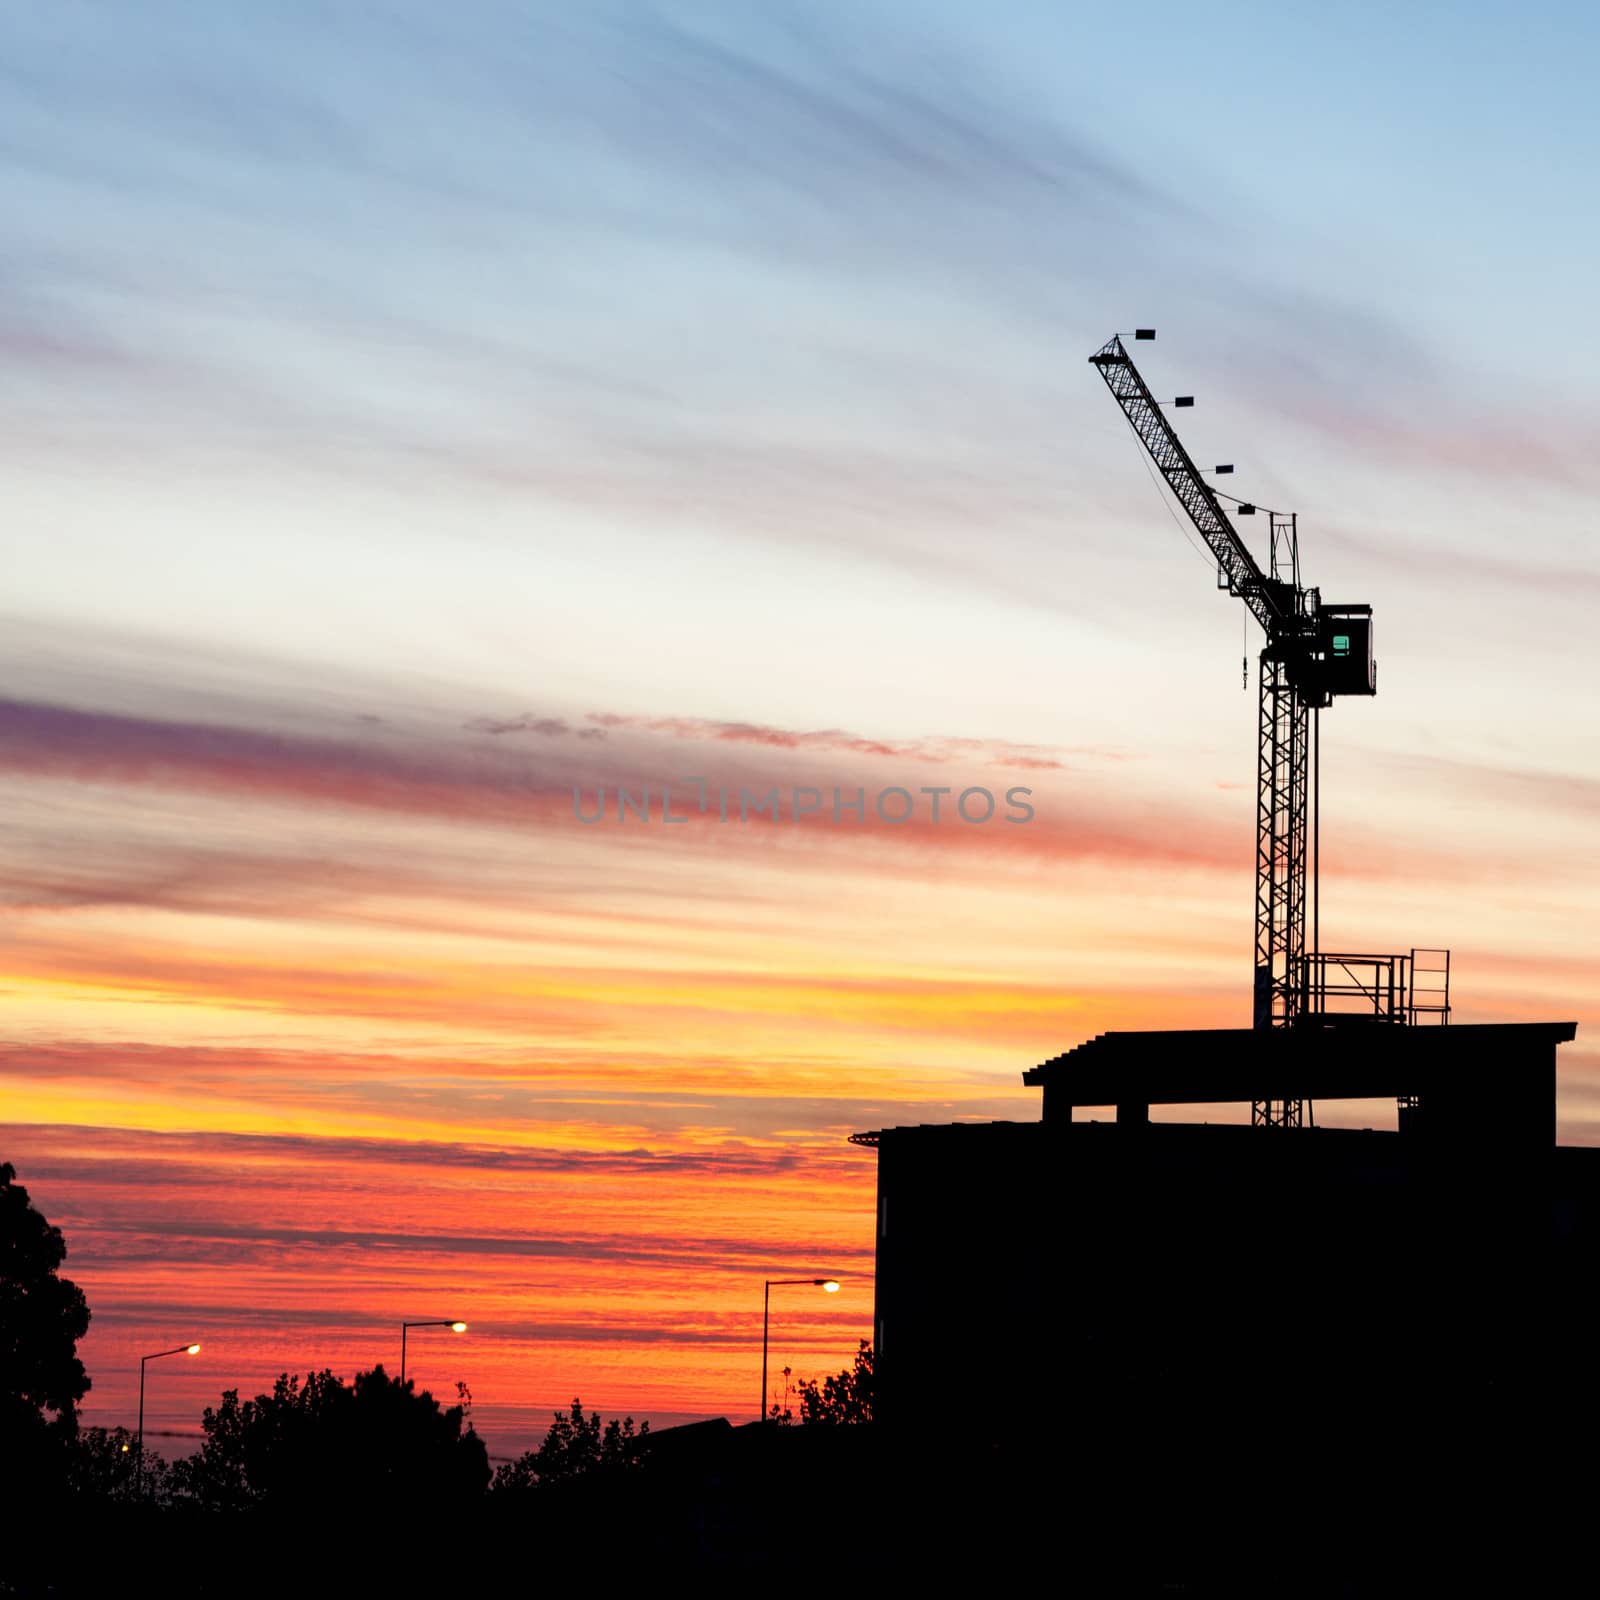 Crane Sillhouette at Sunset by ajn